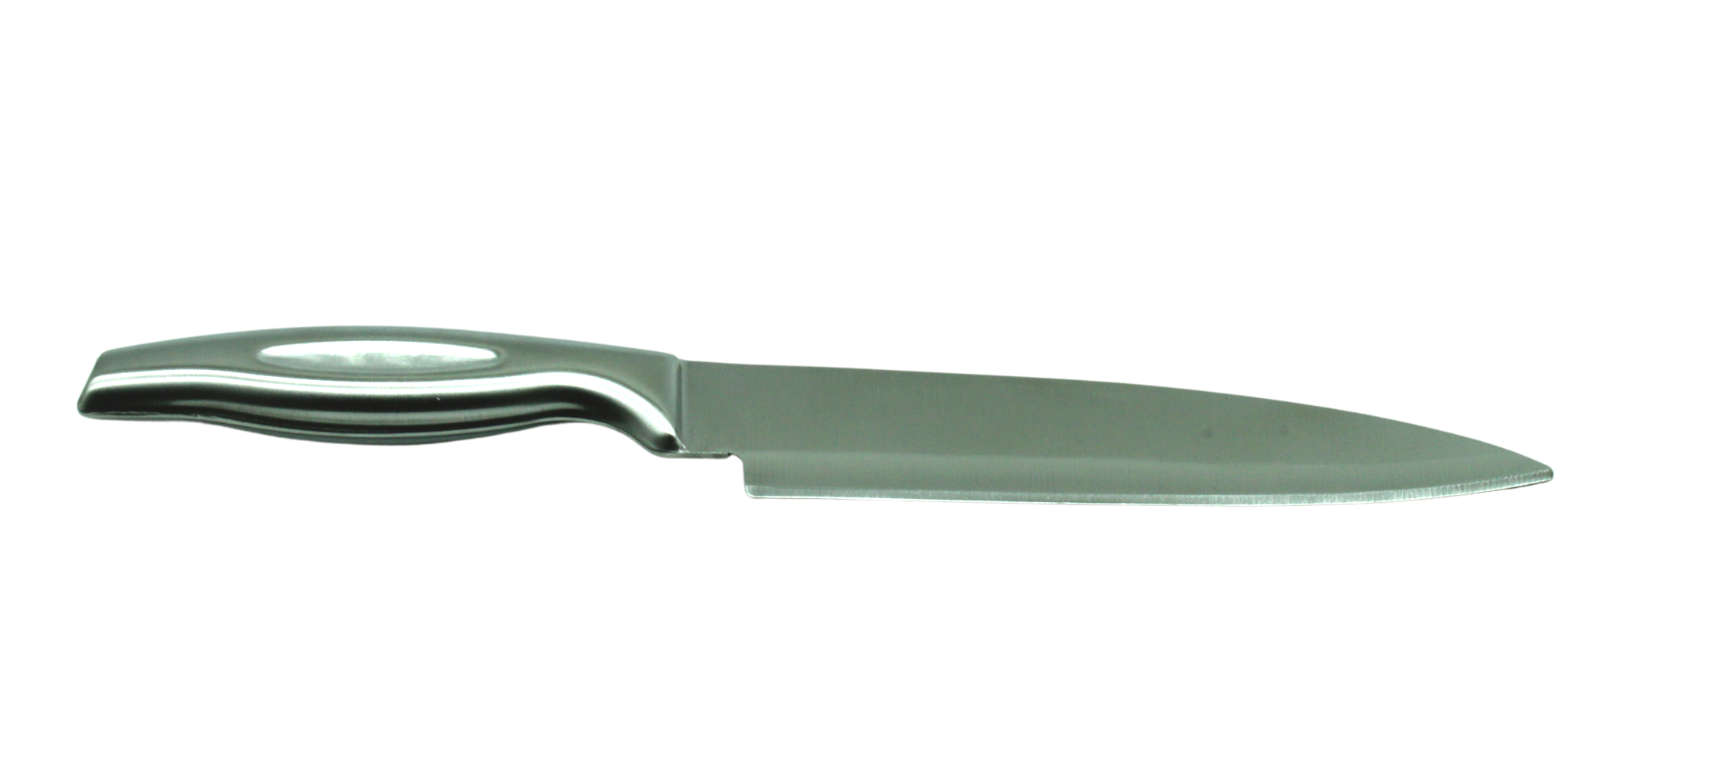 Cast Stainless Steel Vegetable Knife | Large | 0.08 KG TRILONIUM | Cast Iron Cookware